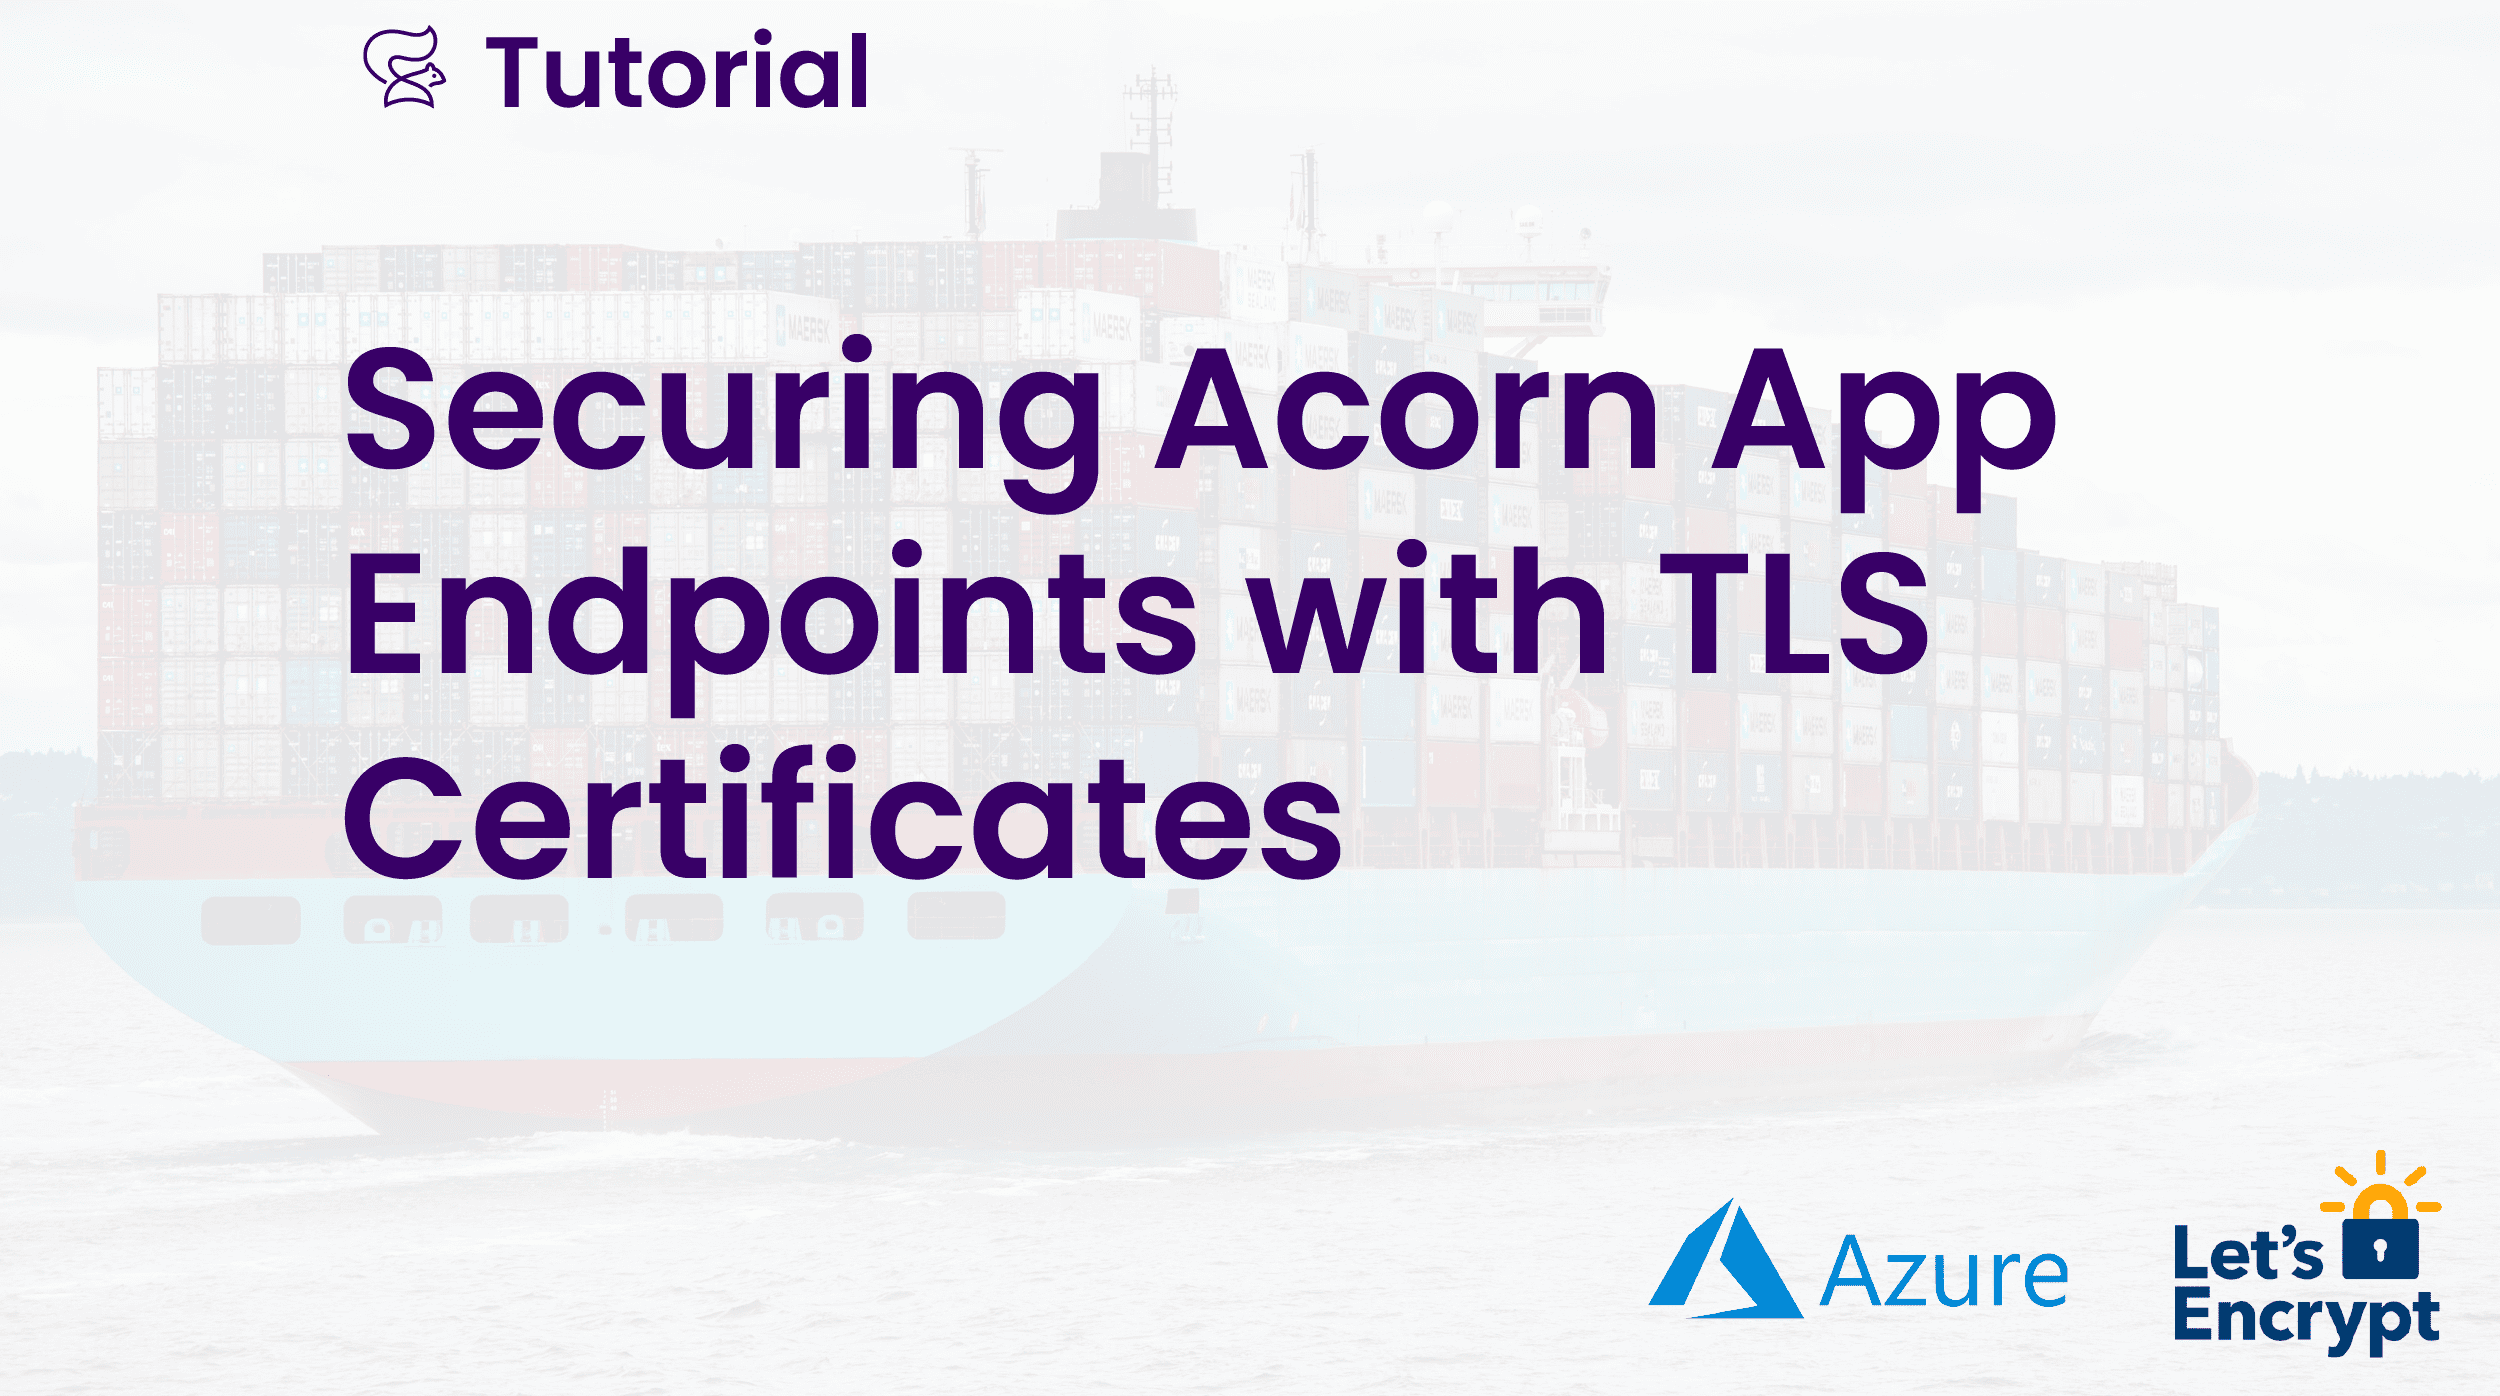 Securing Acorn App Endpoints with TLS Certificates